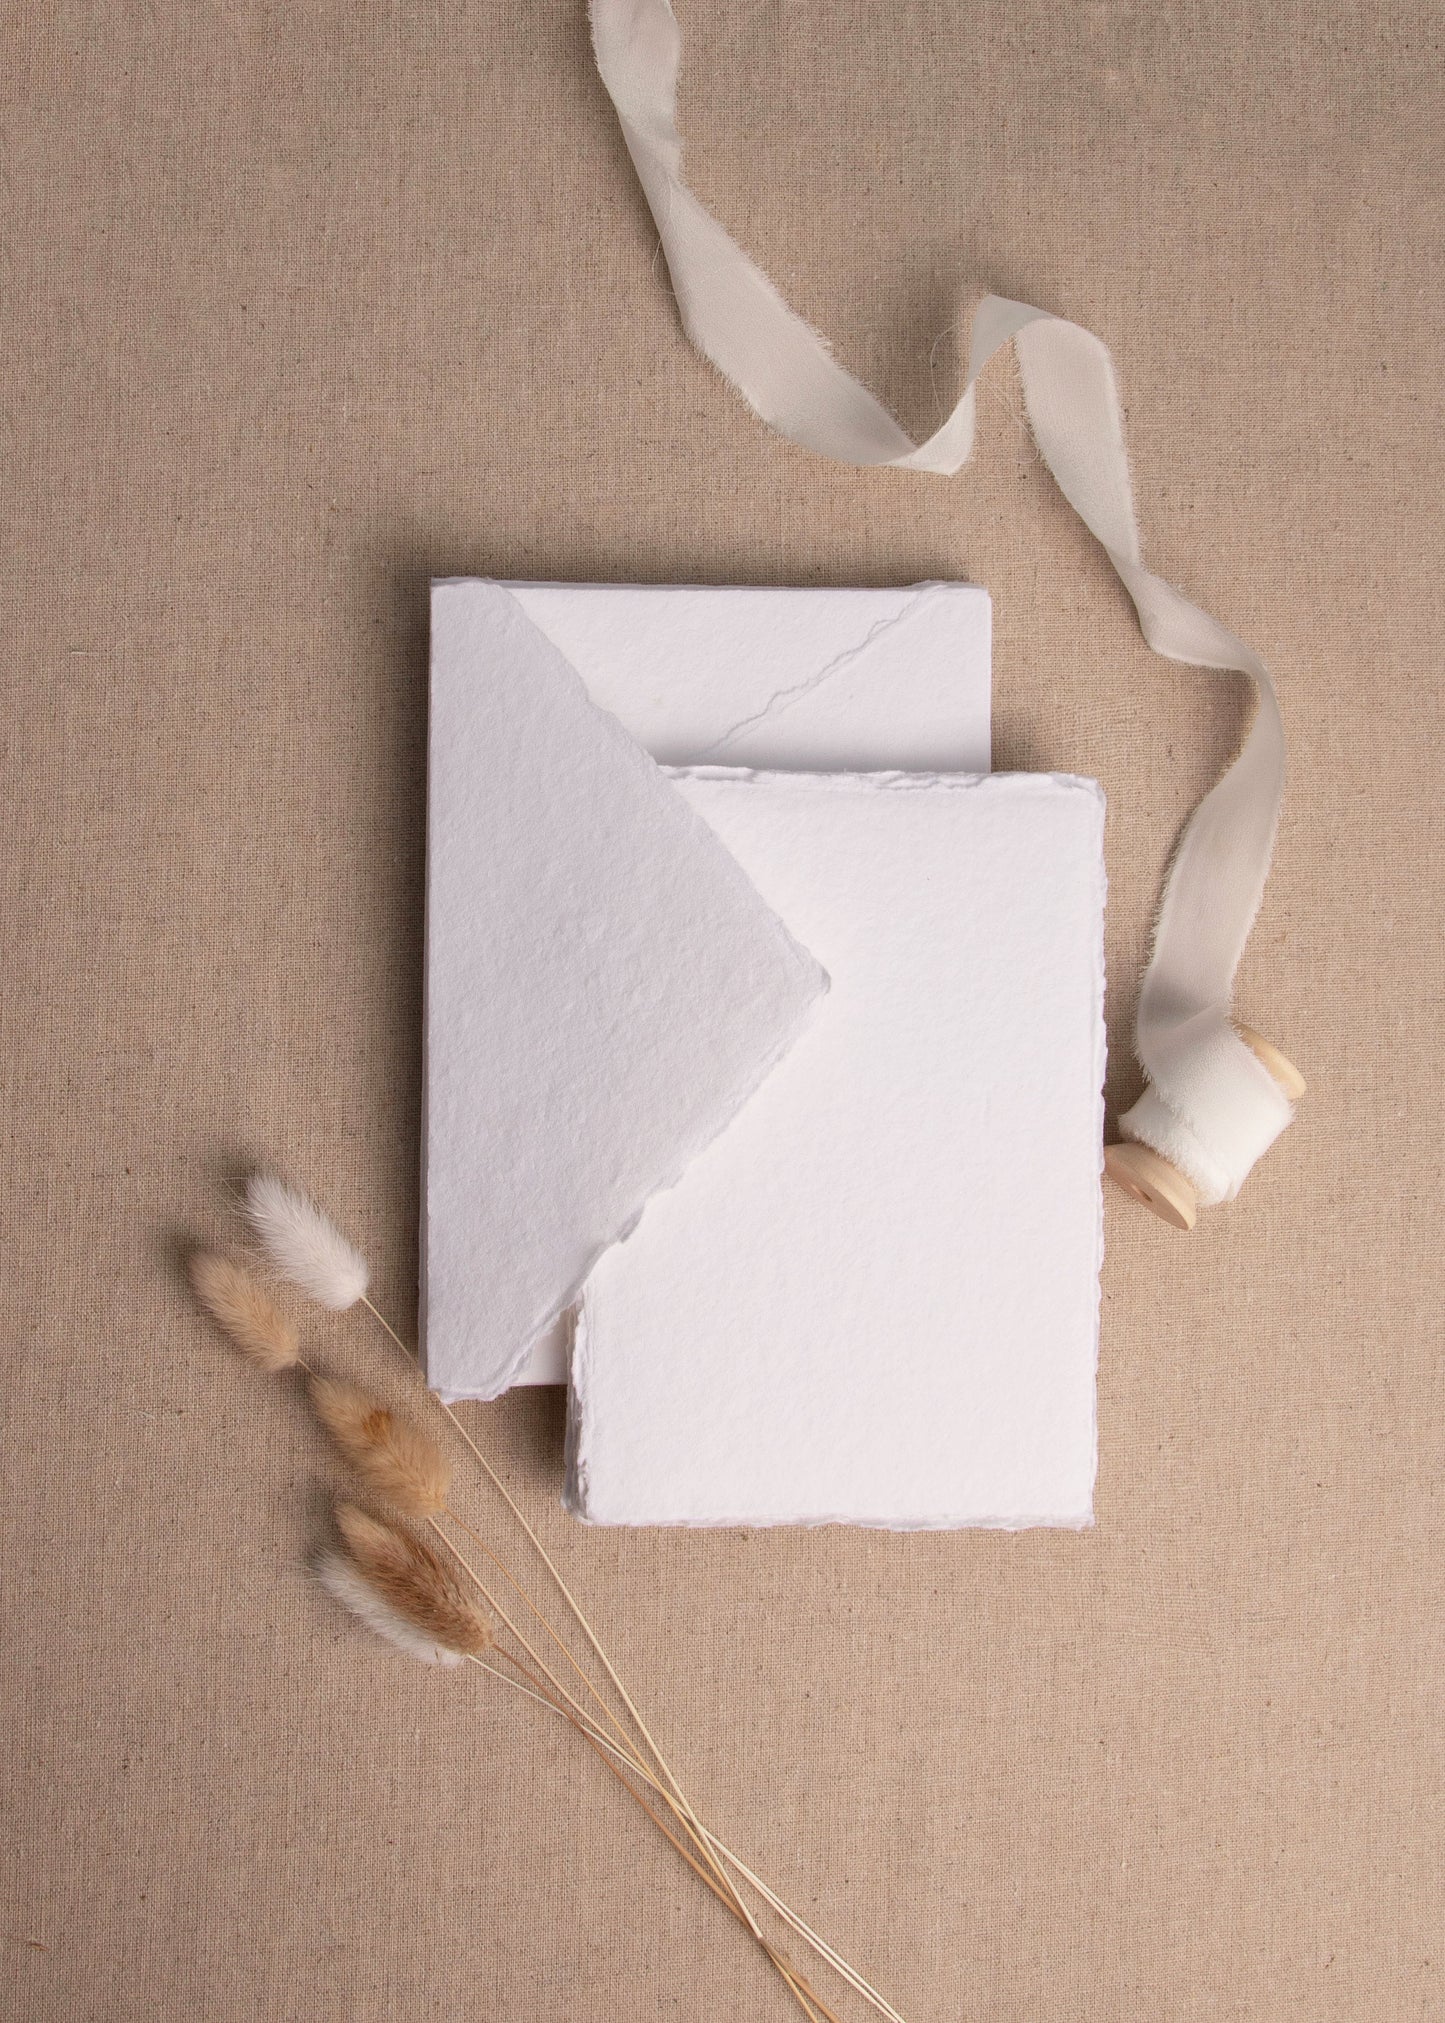 Matching White handmade paper envelope and sheet with deckle edge surrounded by white silk ribbon spool and dried flowers